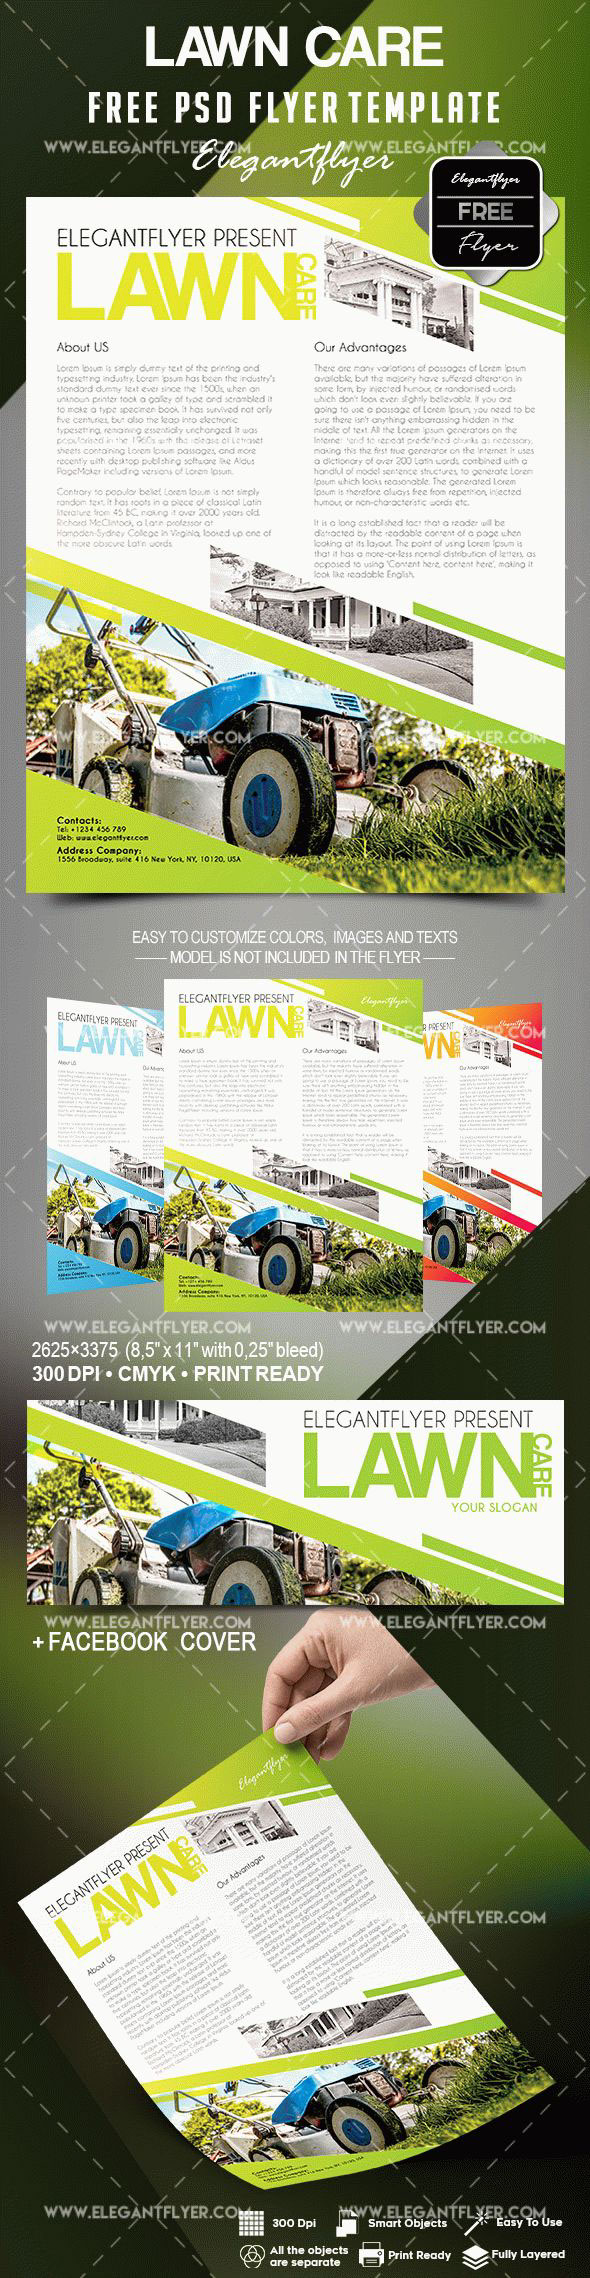 Lawn Care Flyers Templates Free on Behance Inside Lawn Mowing Flyer Template Free